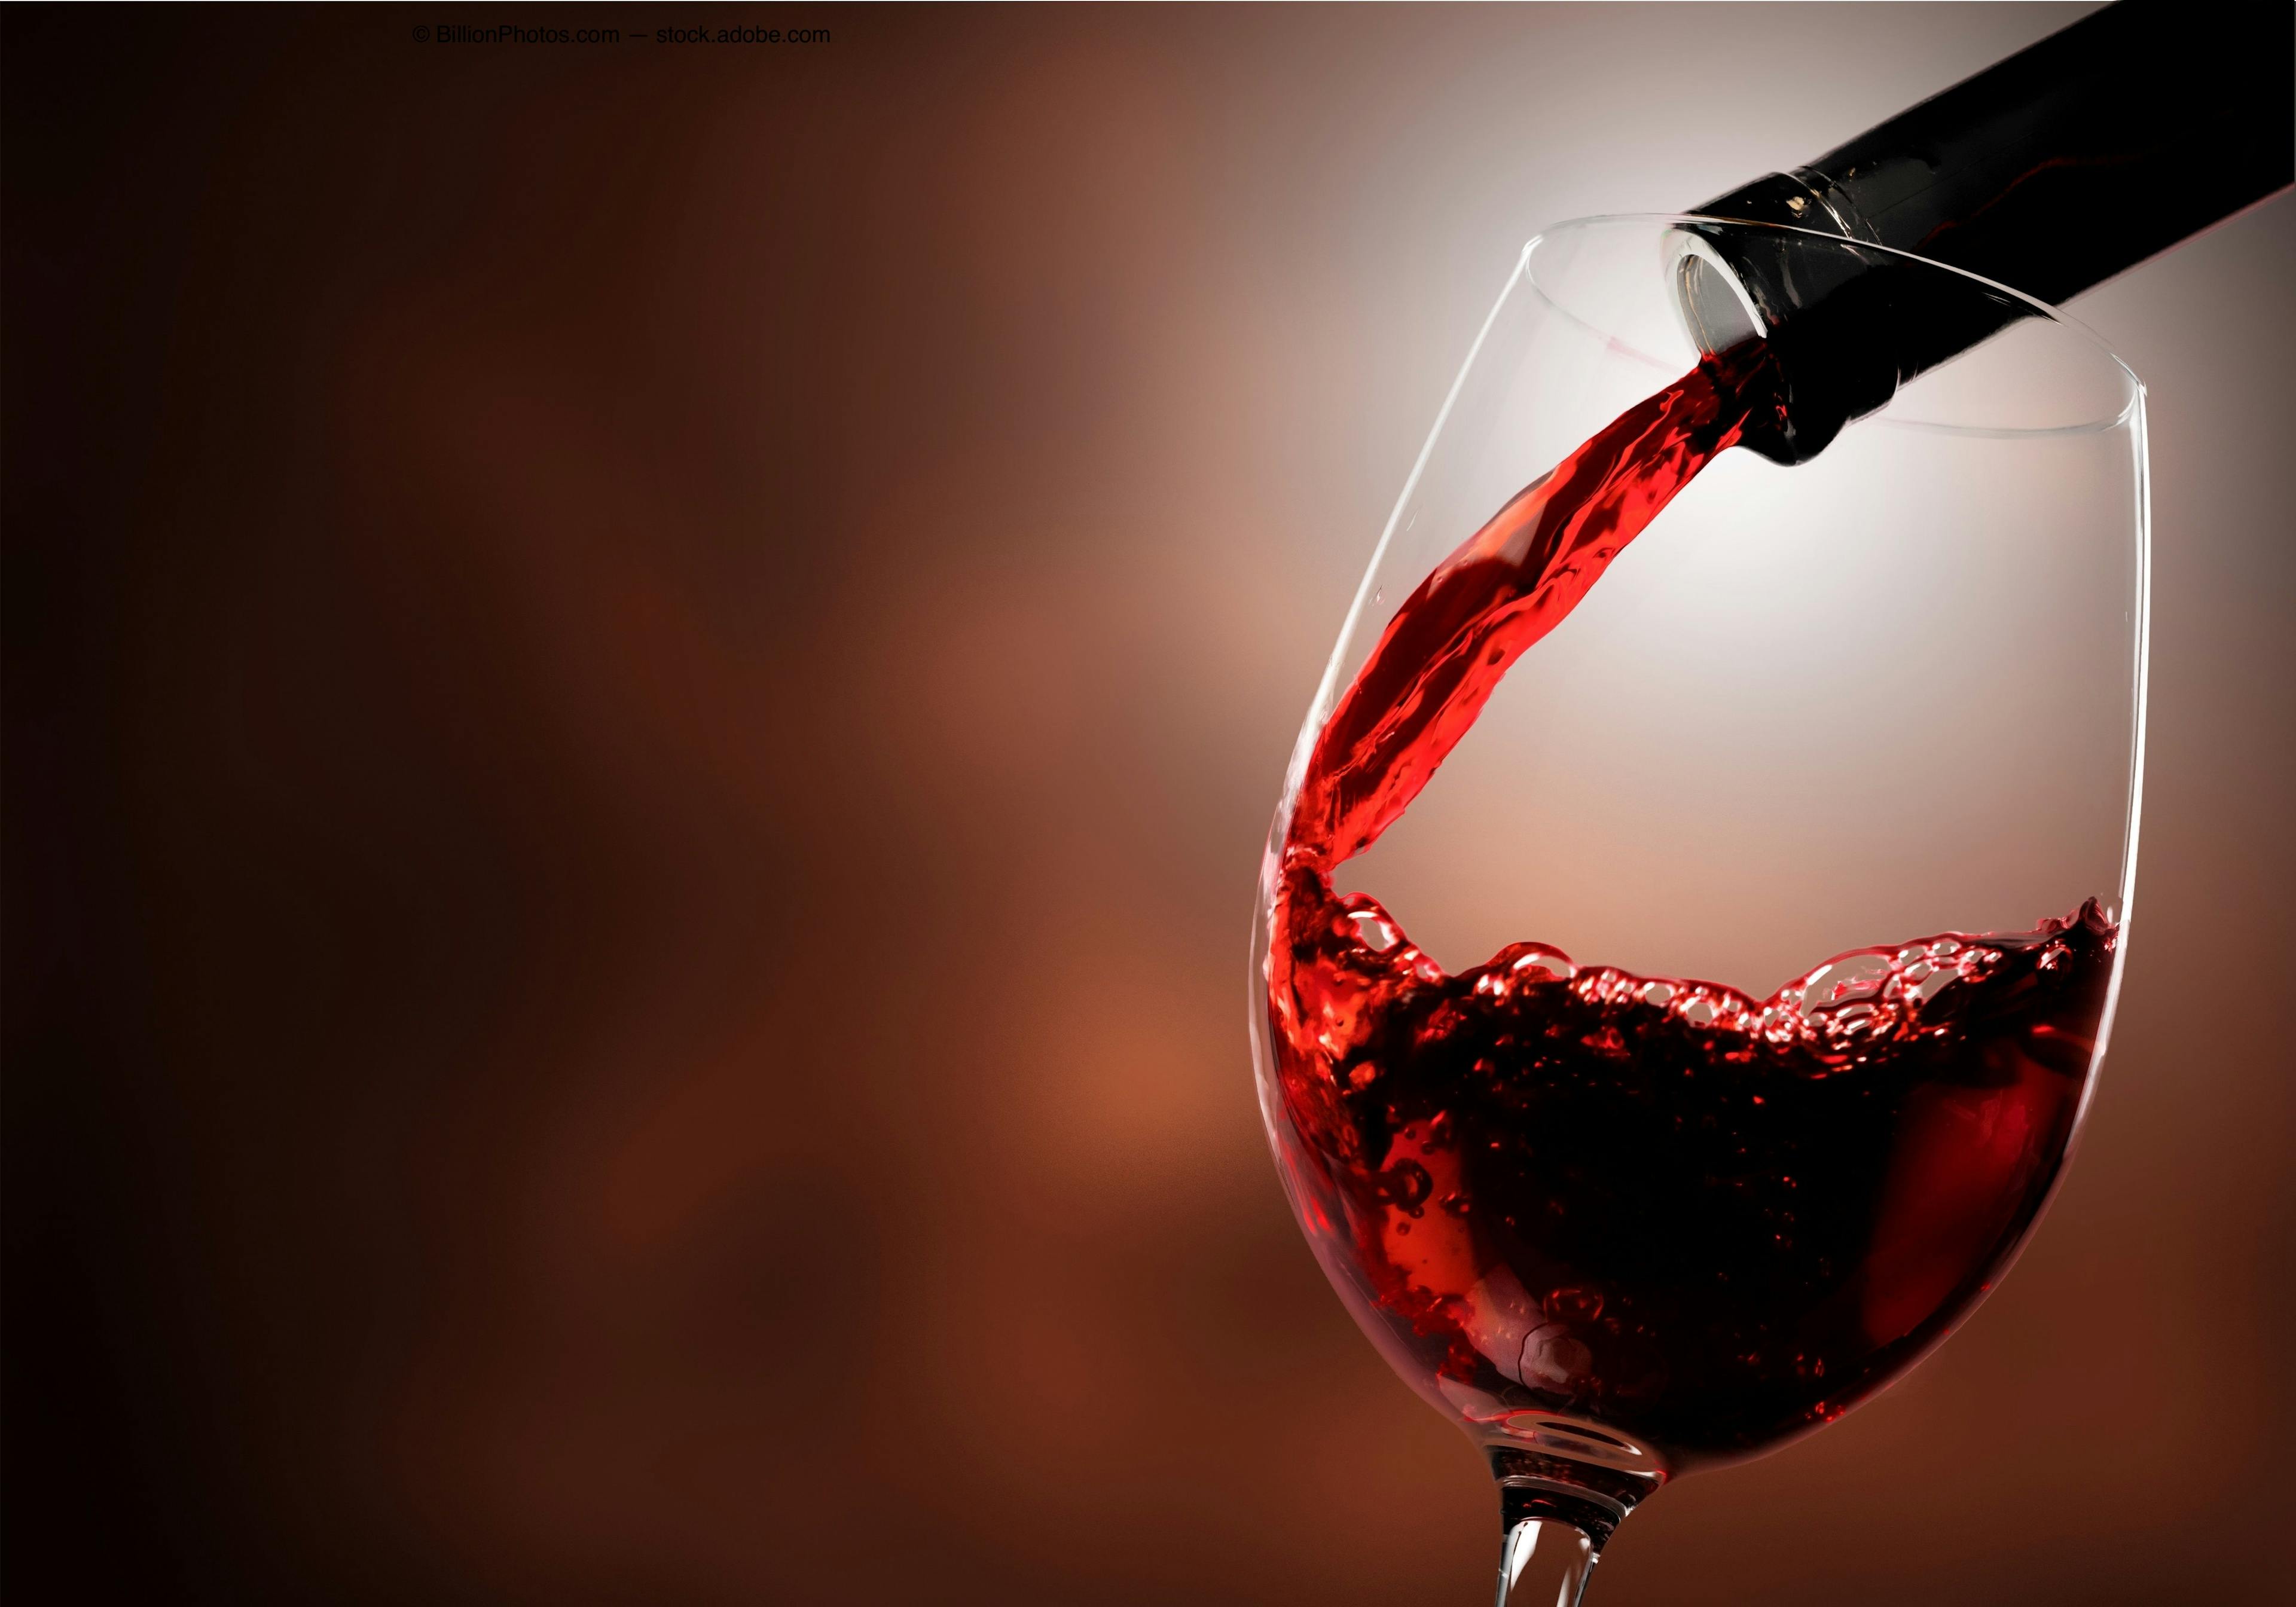 Wine consumption may prevent cataracts, study finds